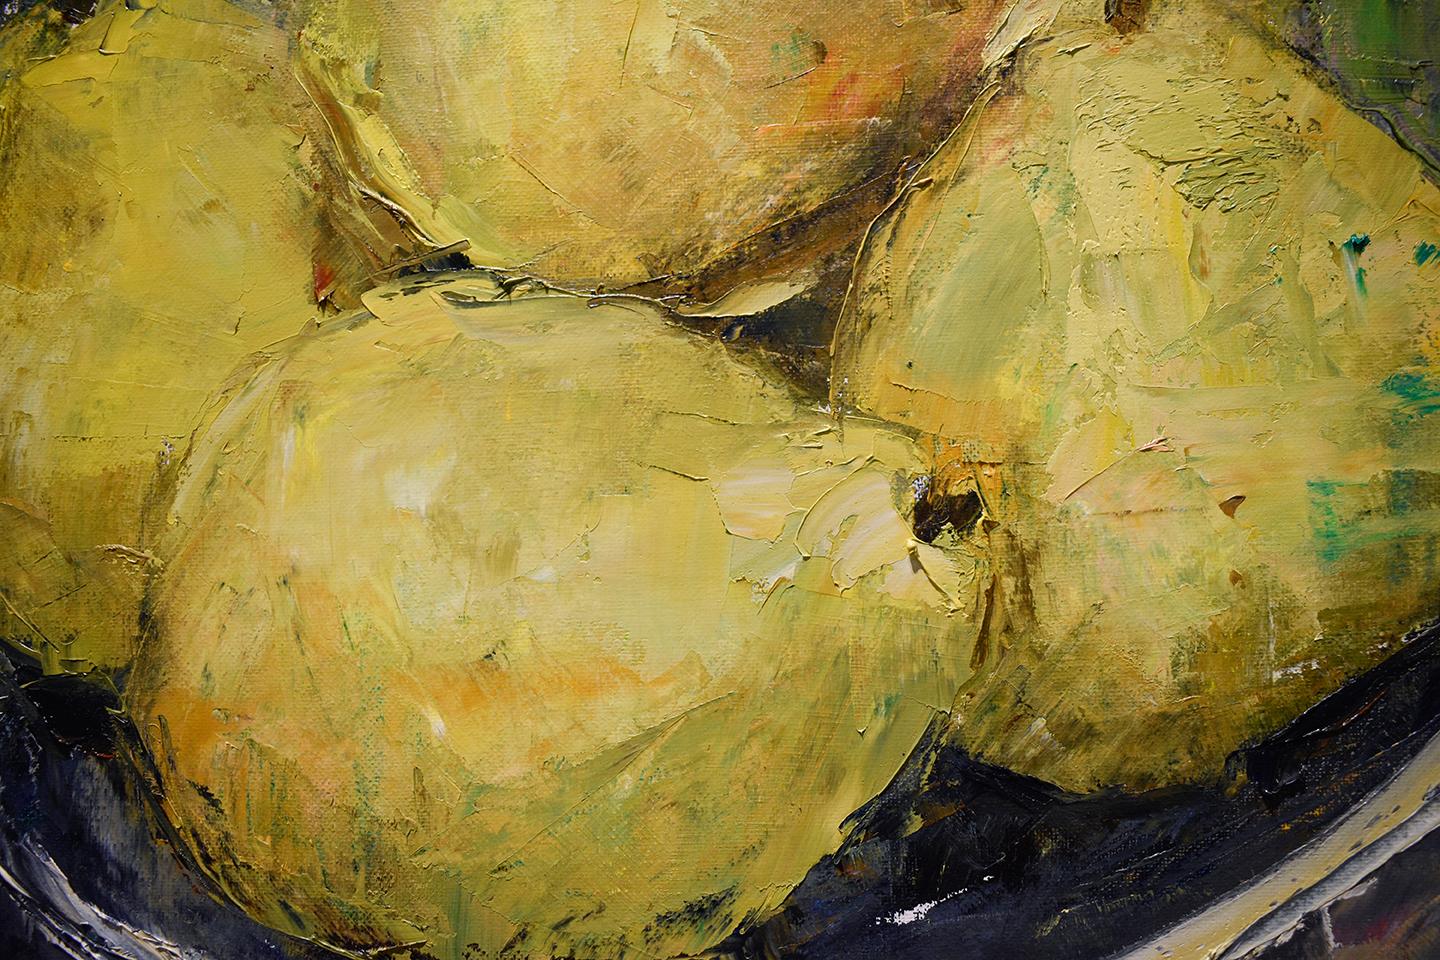 Pears (Impressionistic Fruit Still Life Painting of Chartreuse Yellow Pears) 1